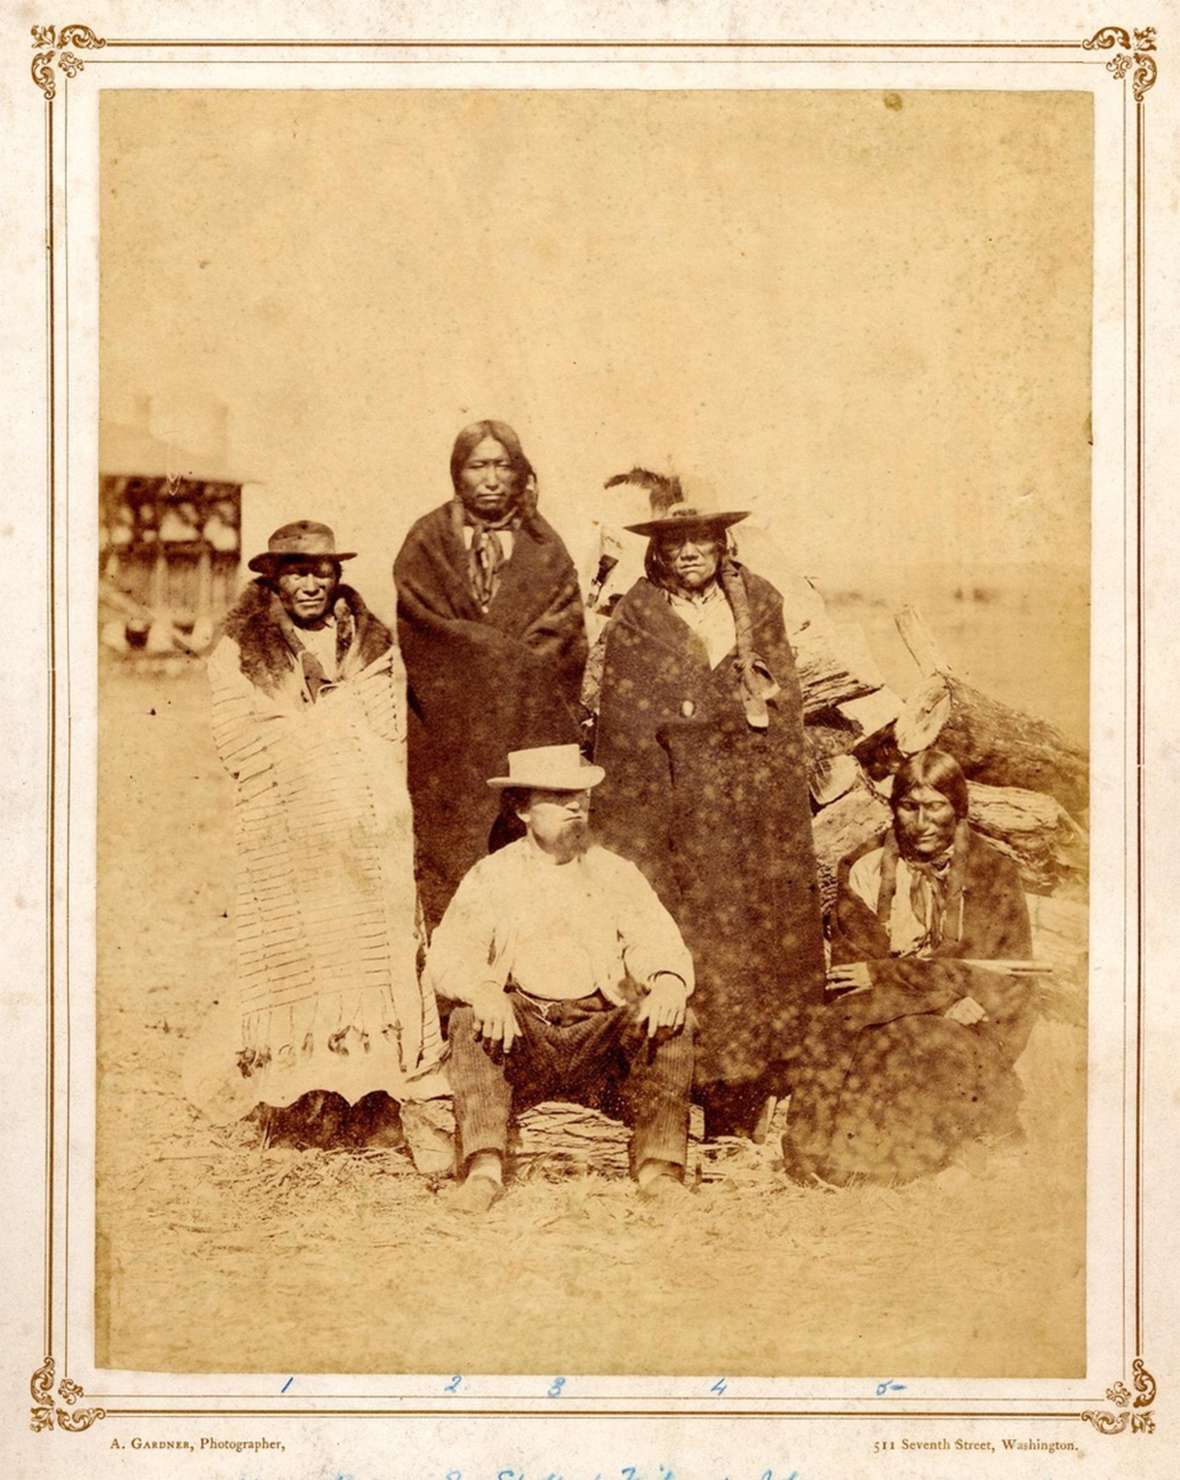 Fur trader Leon Pallardy sits in 1868 in front of the Lakota Sioux men, left to right, Fast Bear, Spotted Tail, John and Long Hair. Eight years earlier the census documented Pallardy living in civilian quarters next to Fort Laramie. Photo by Alexander Gardner. British Museum.